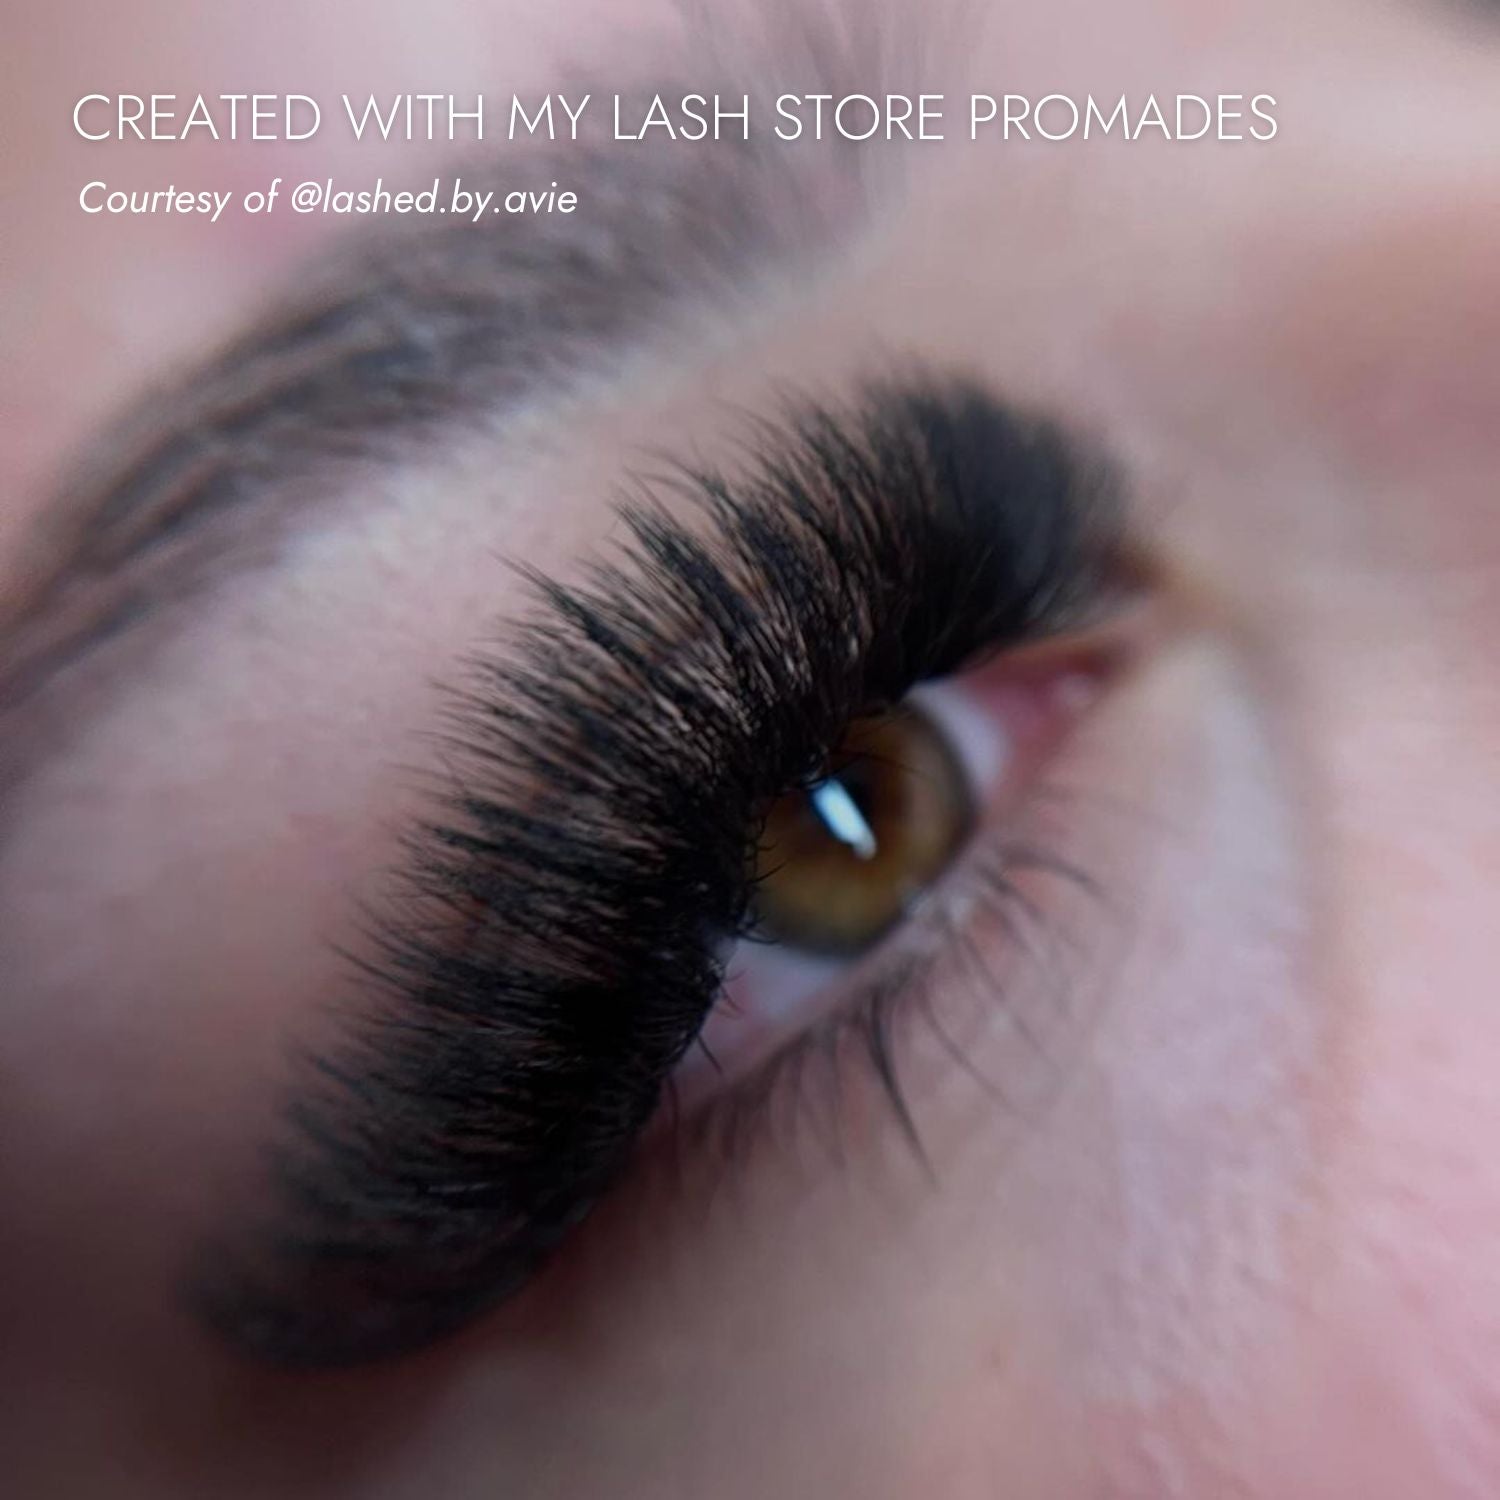 14D Loose Promade Fans - My Lash Store